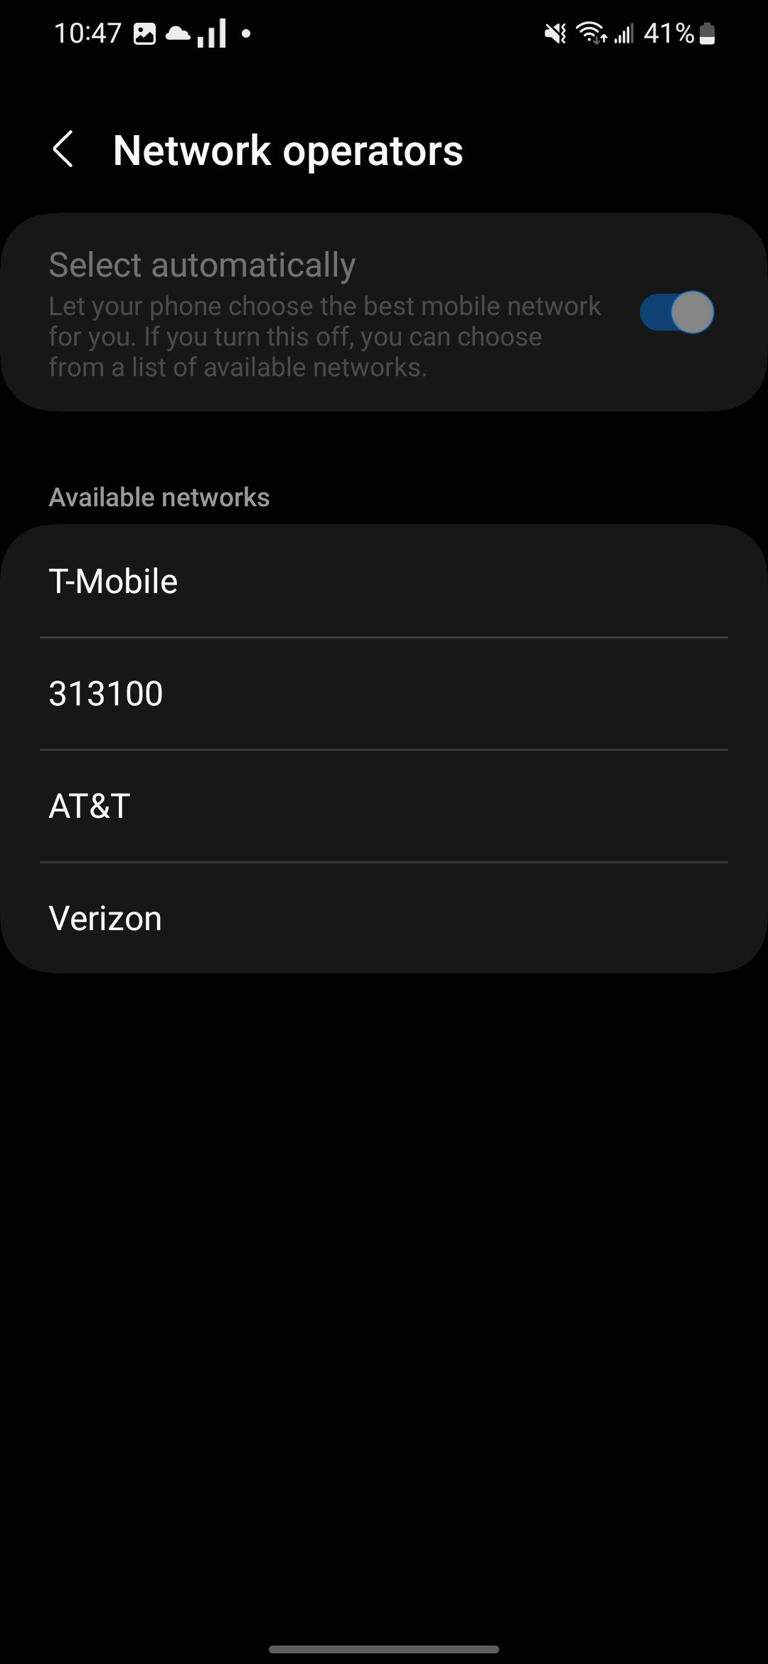 The Network operators page in the Samsung Settings app showing all available operators